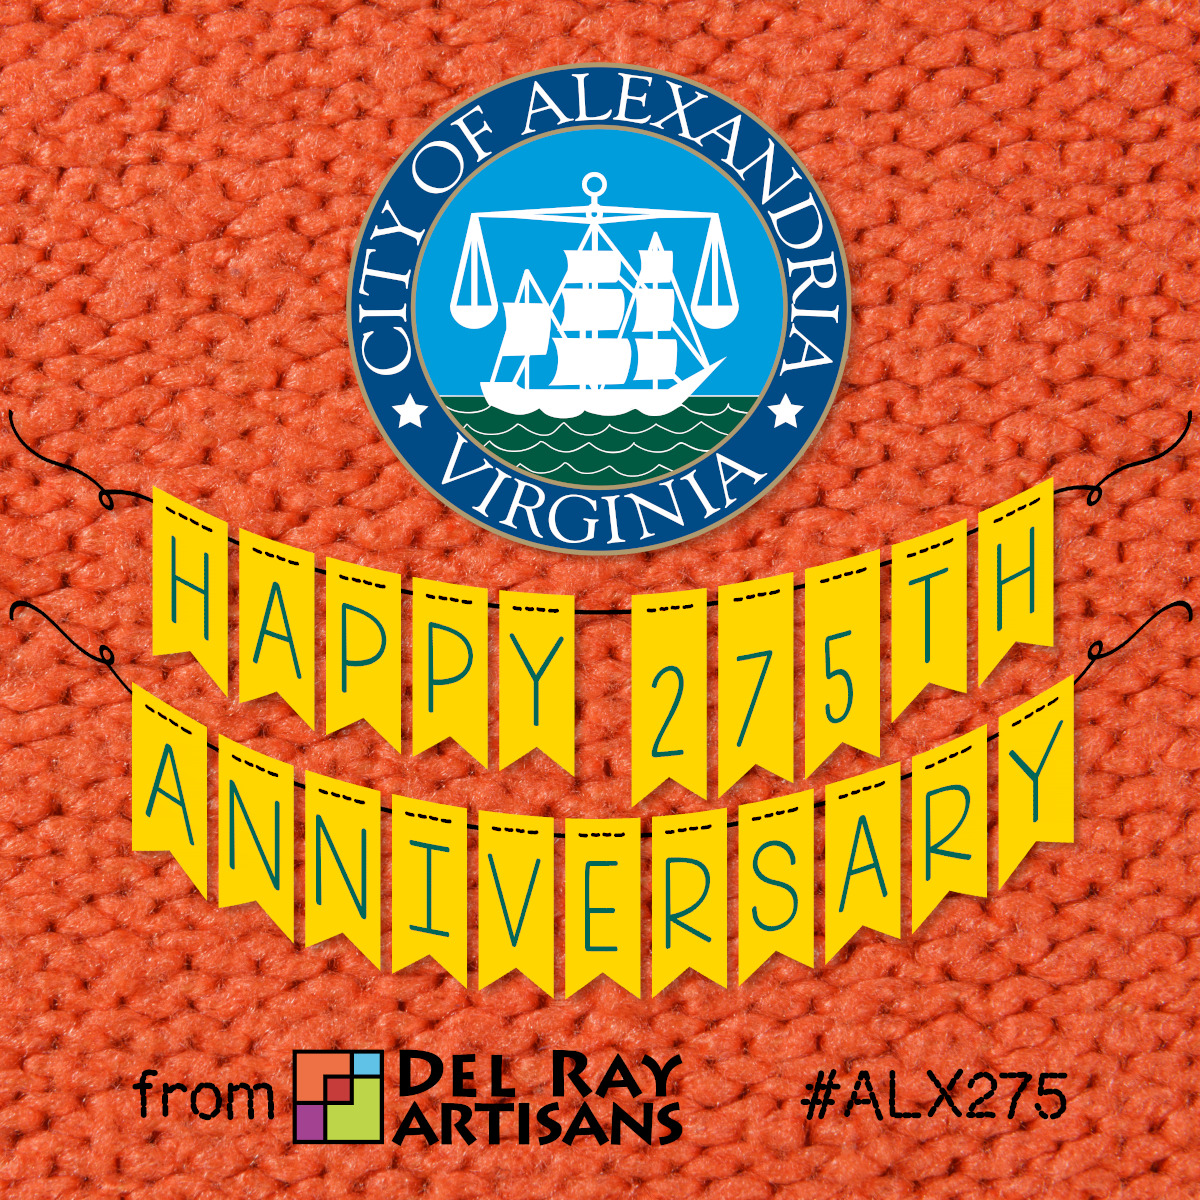 Happy 275th Anniversary to the City of Alexandria from Del Ray Artisans #ALX275